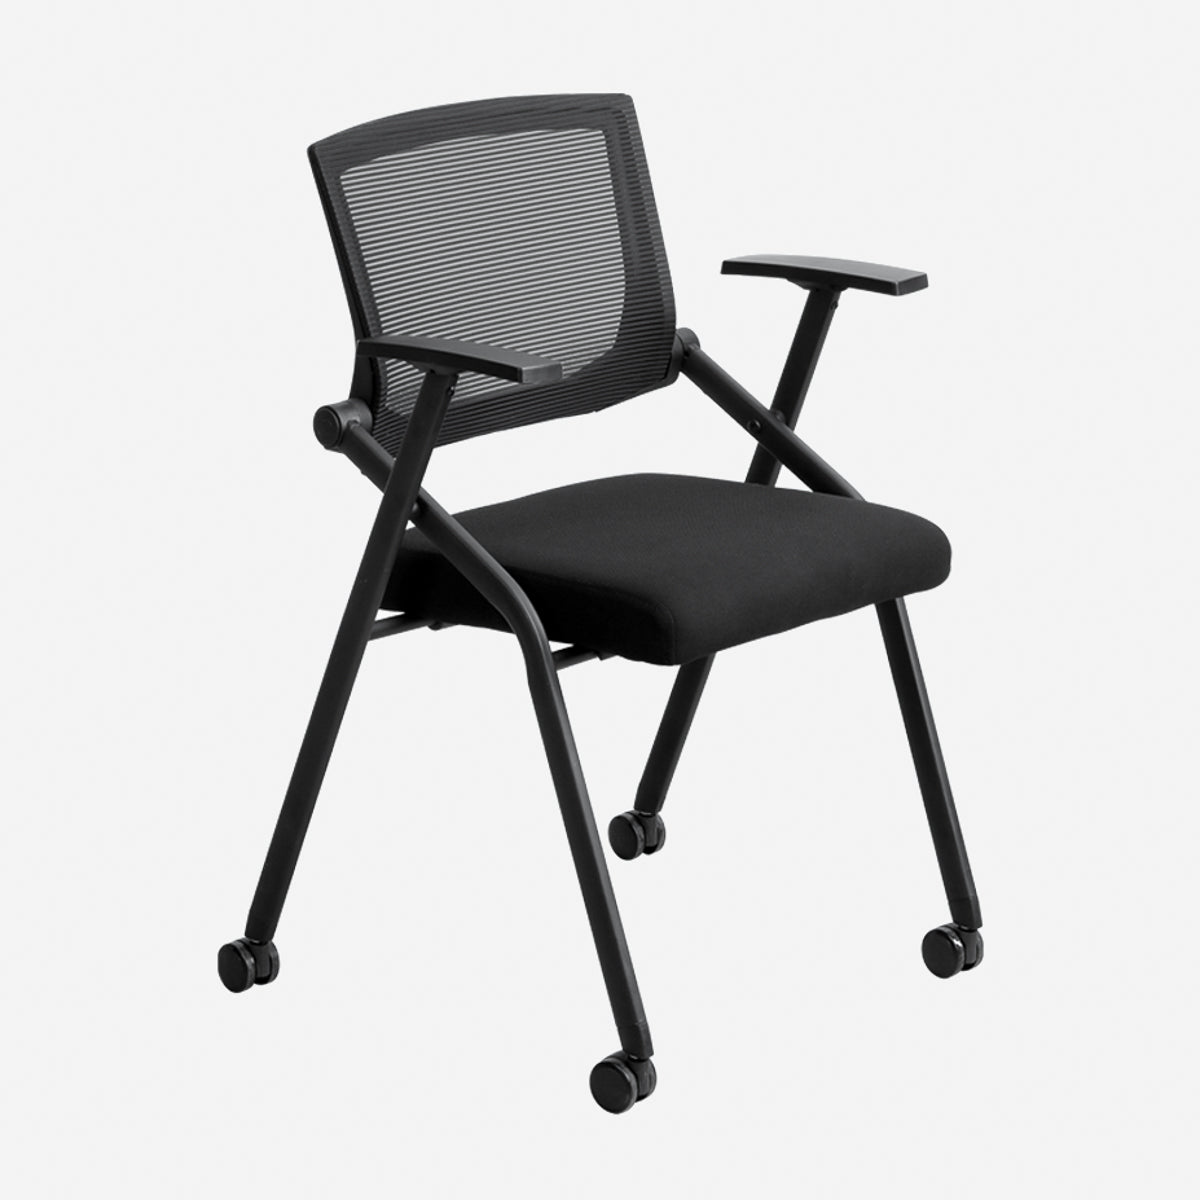 Hosh Foldable Office Chair with Wheels